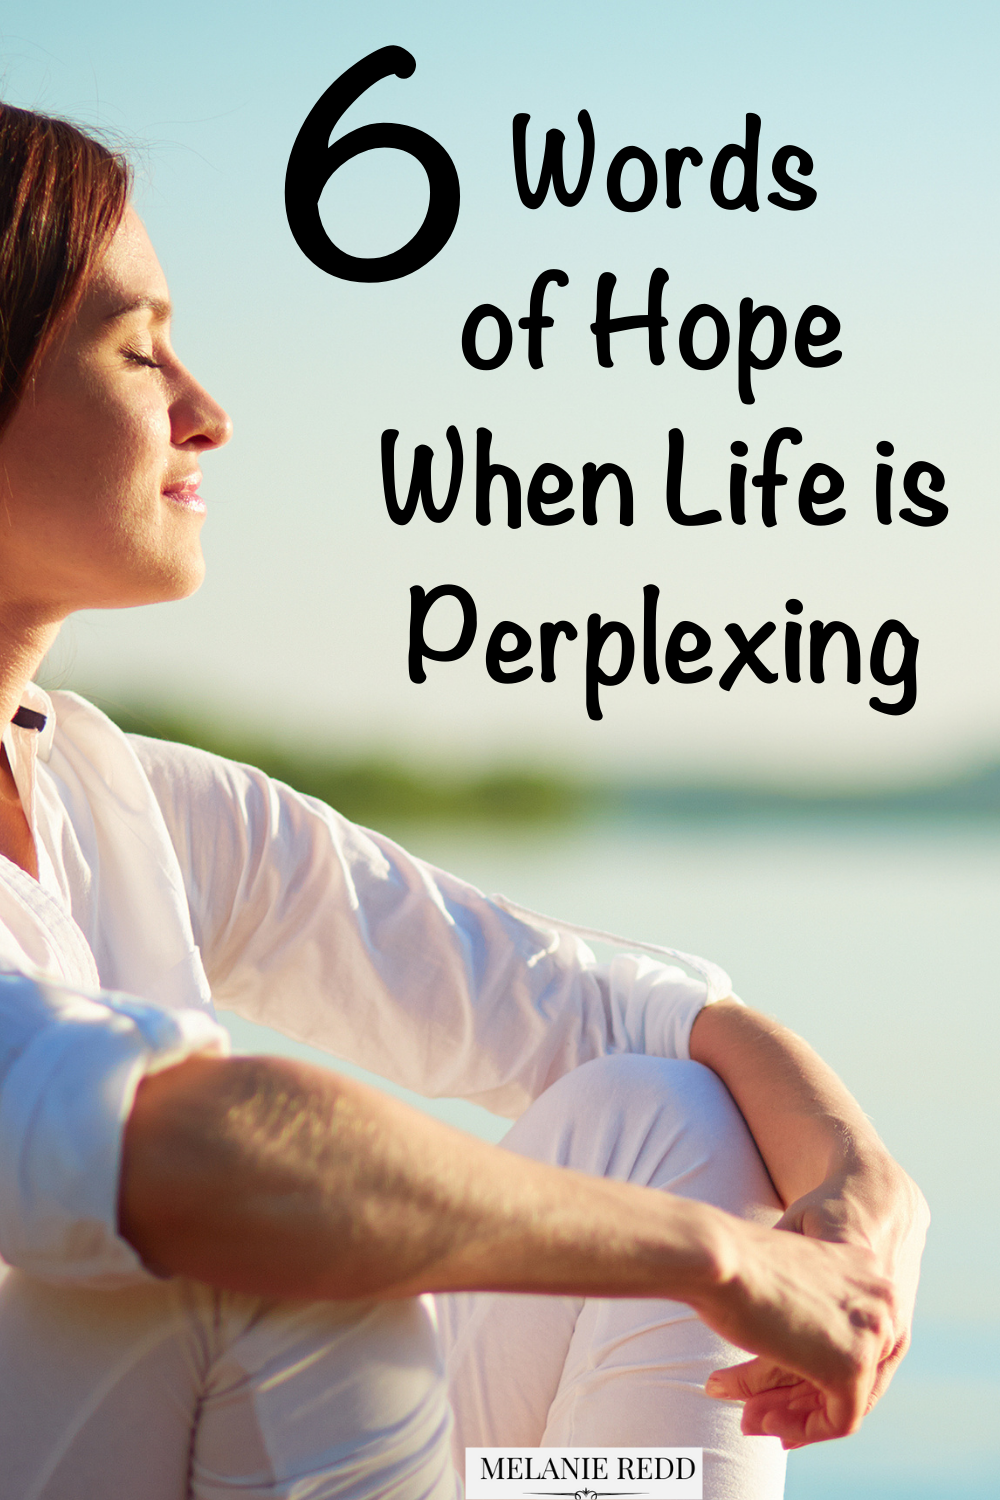 Sometimes life is just hard! Unexplainable. Strange. Difficult. But there is hope. Here are 6 words of hope when life is perplexing. #life #perplexing #perplexed #hope